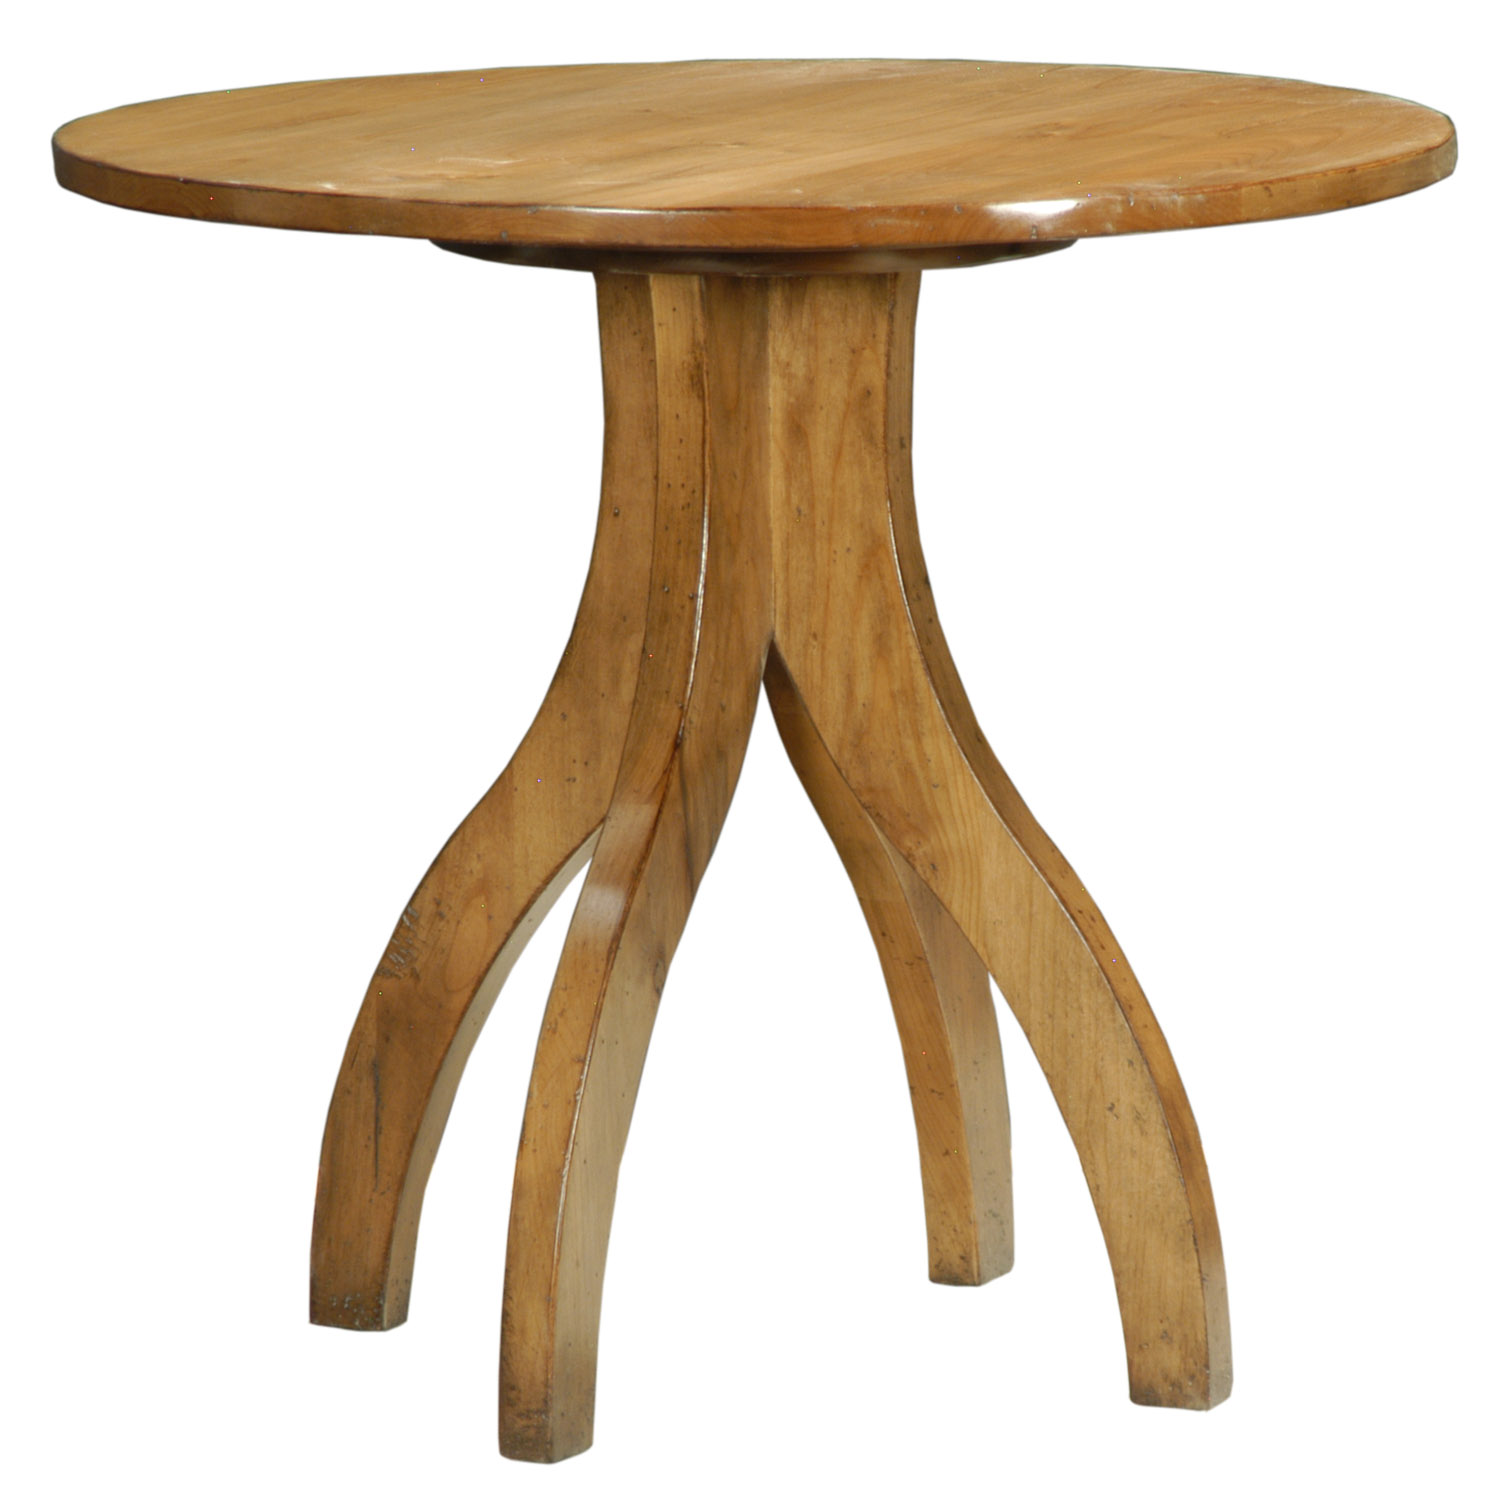 Celeste contemporary modern round wirebrushed oak side or end table by Woodland furniture in Idaho Falls